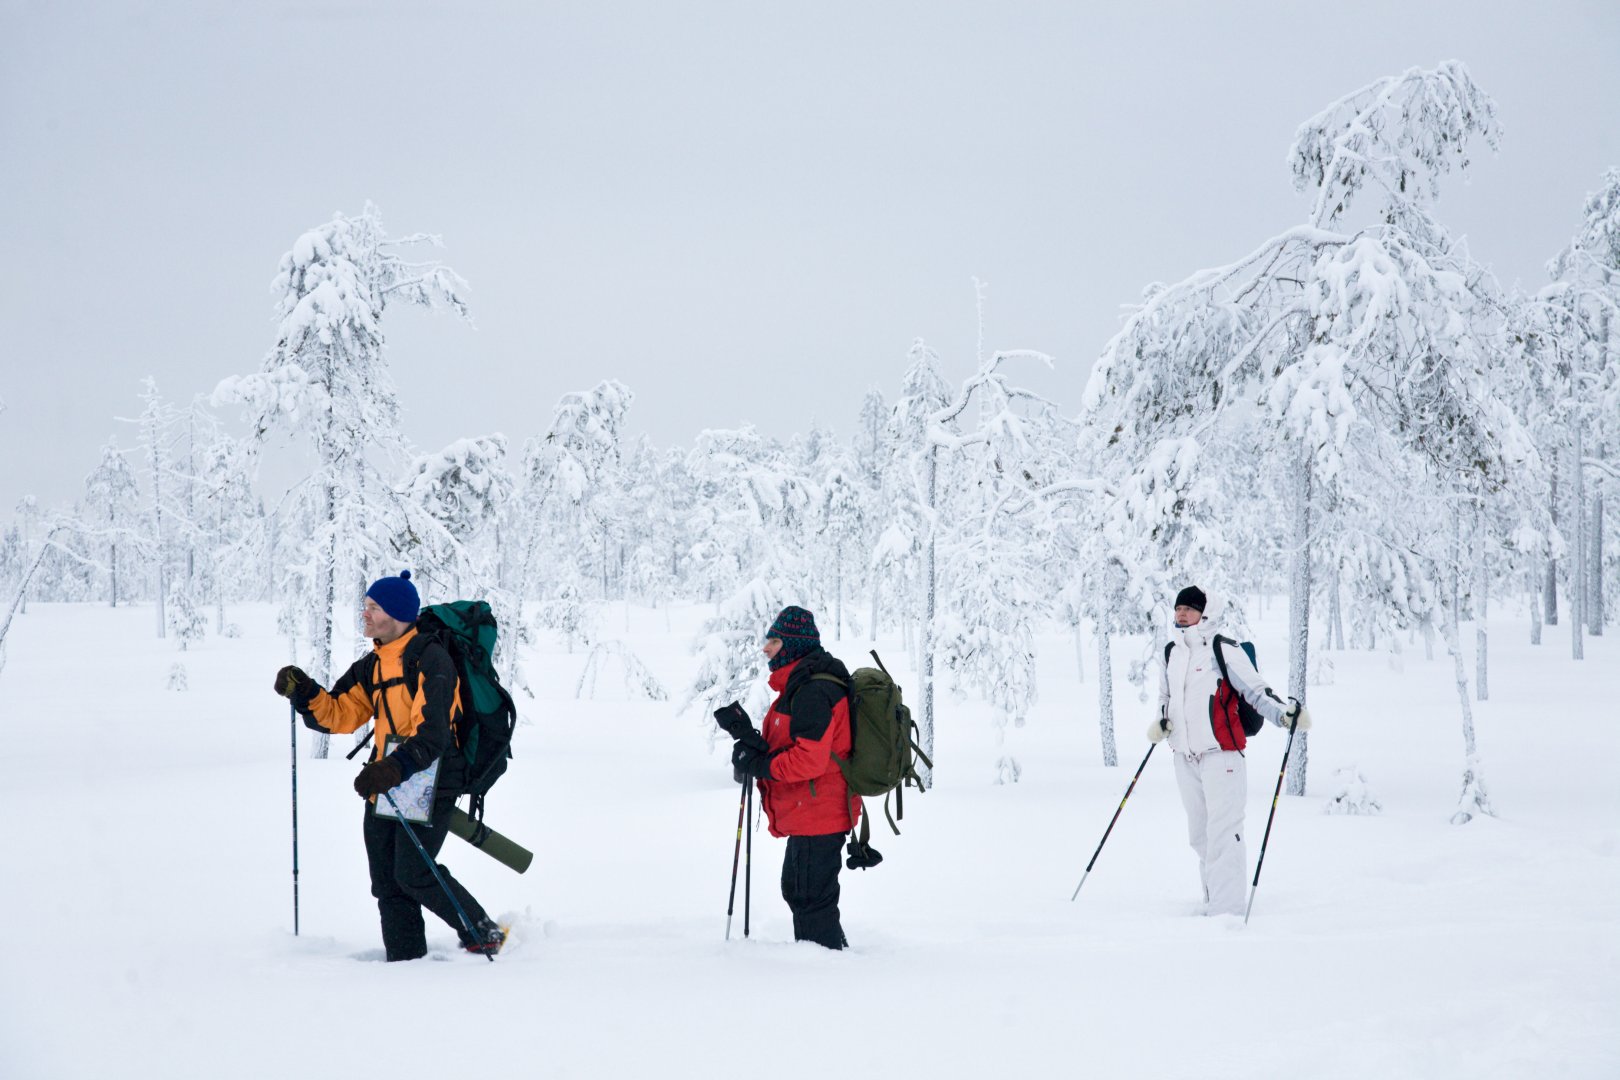 Explore the taiga forests by snowshoes